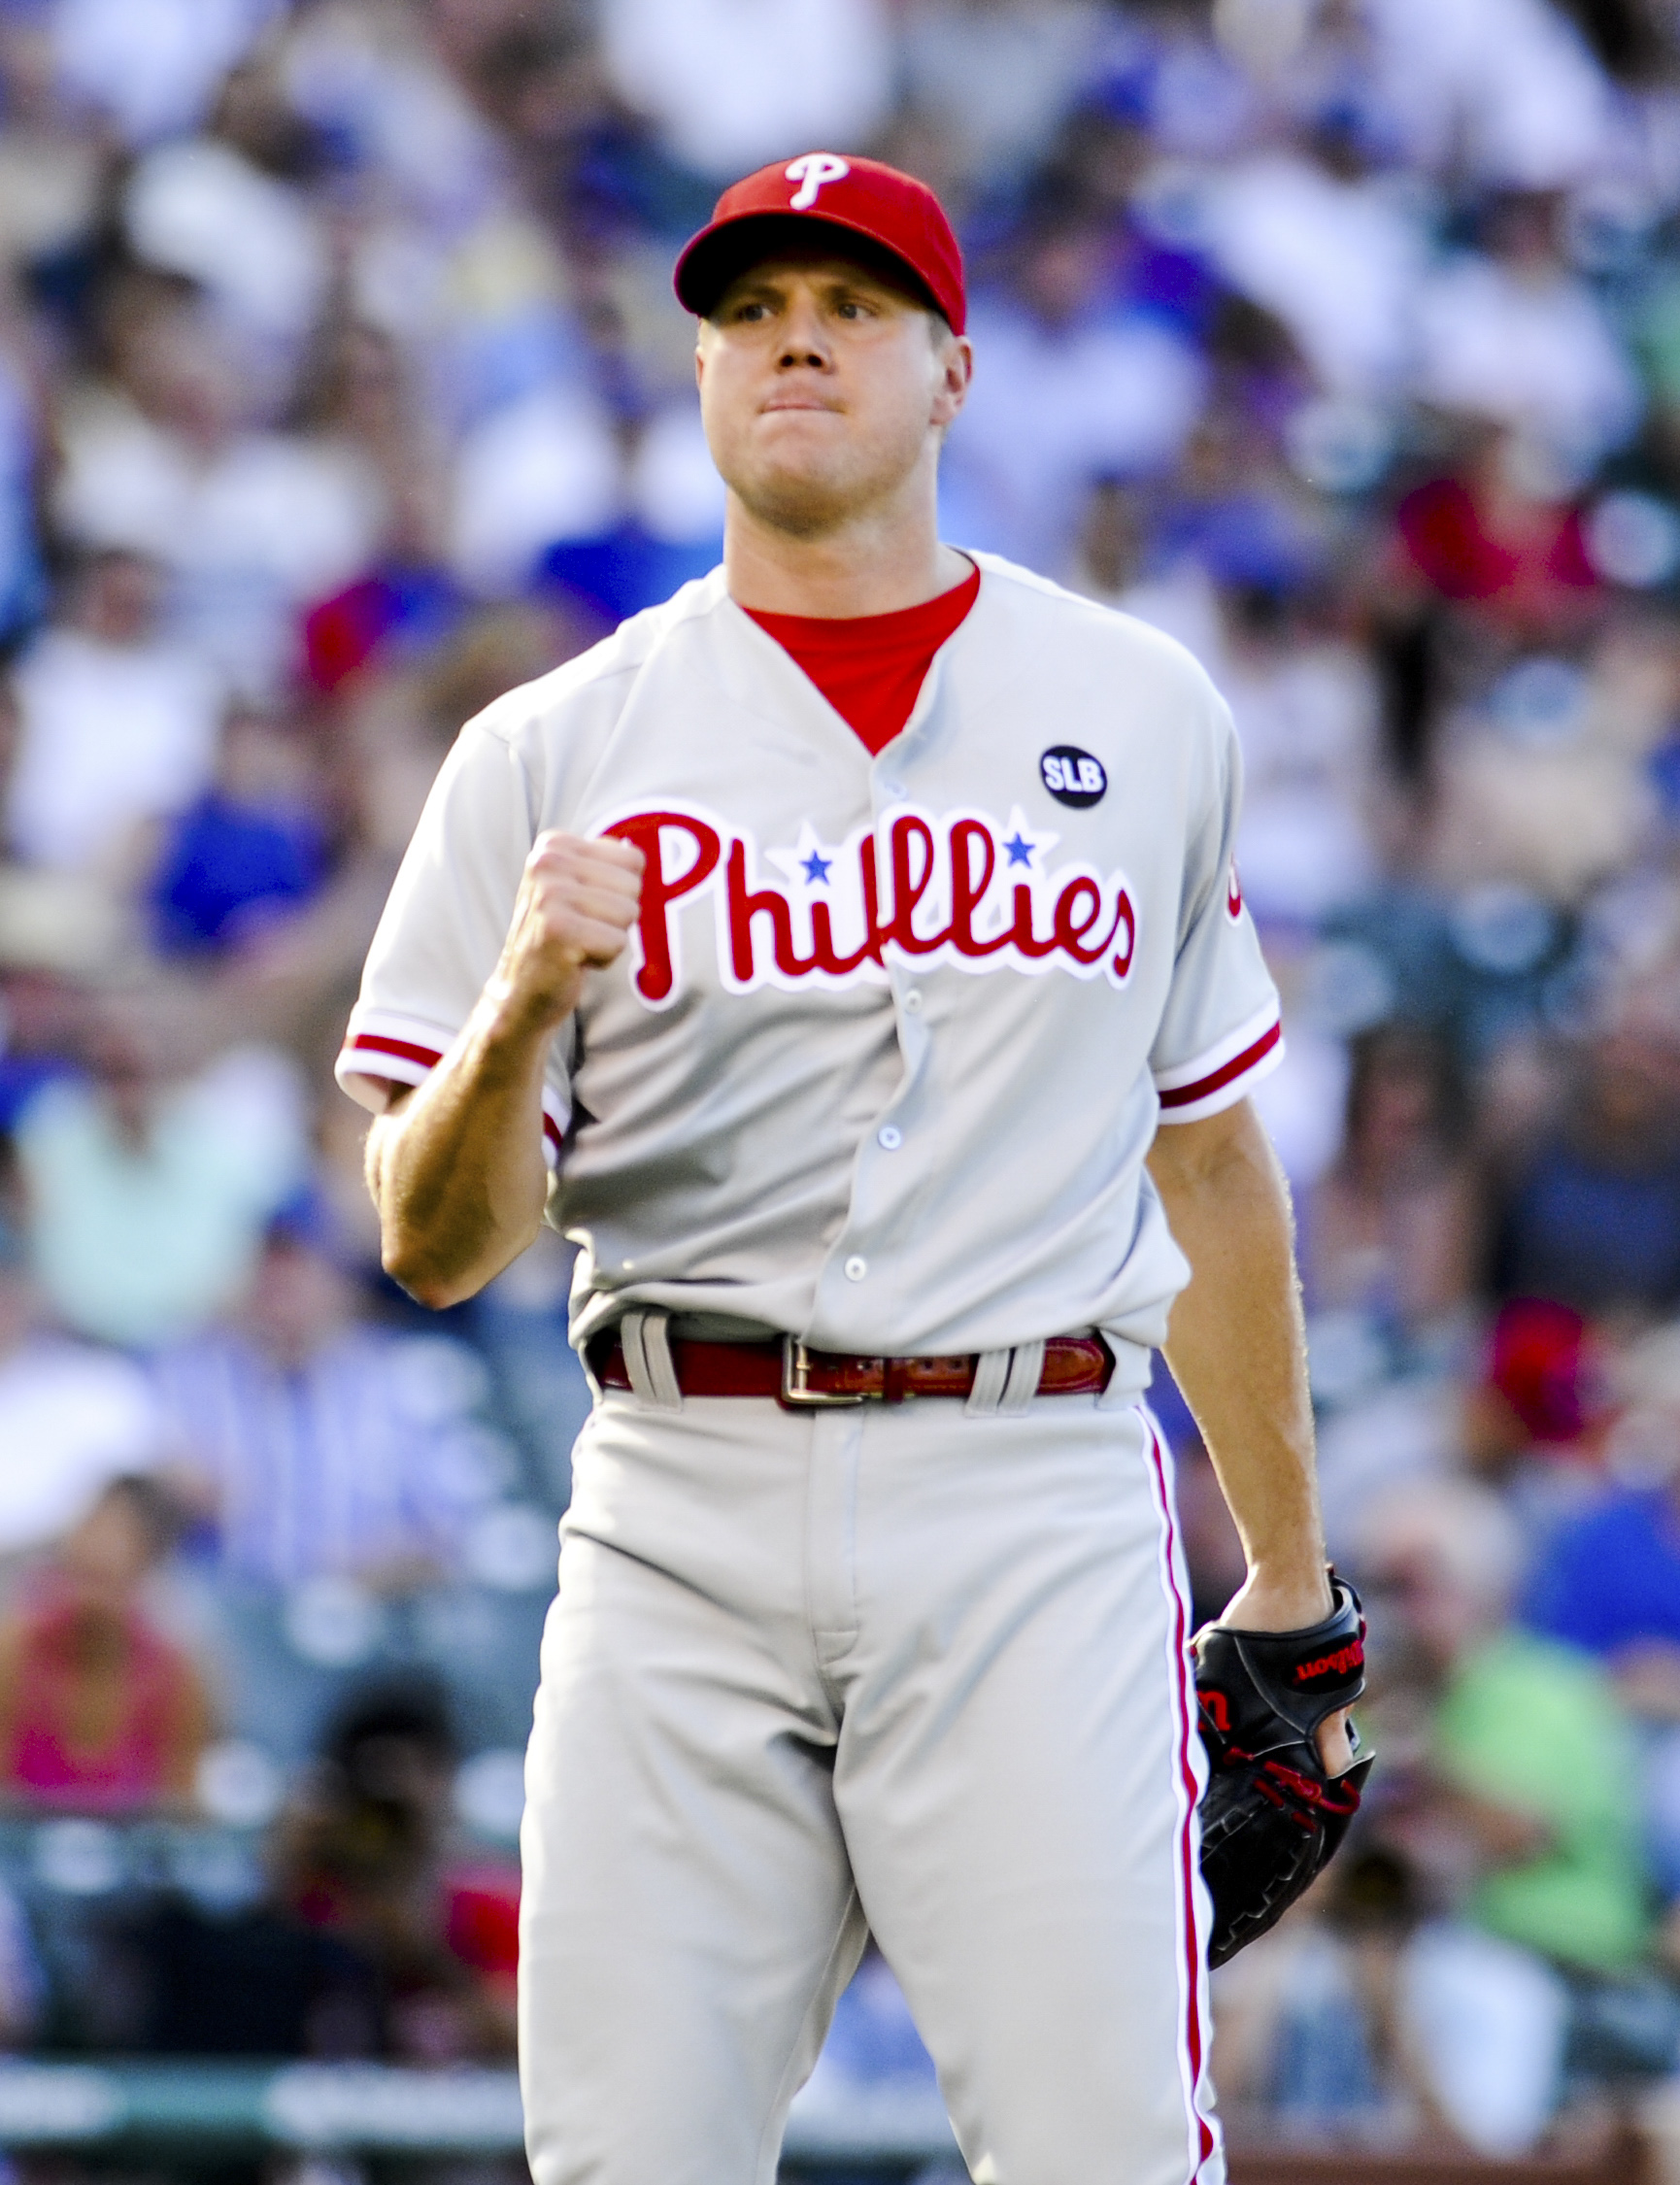 Jonathan Papelbon Gets Suspended for the Rest of the Season